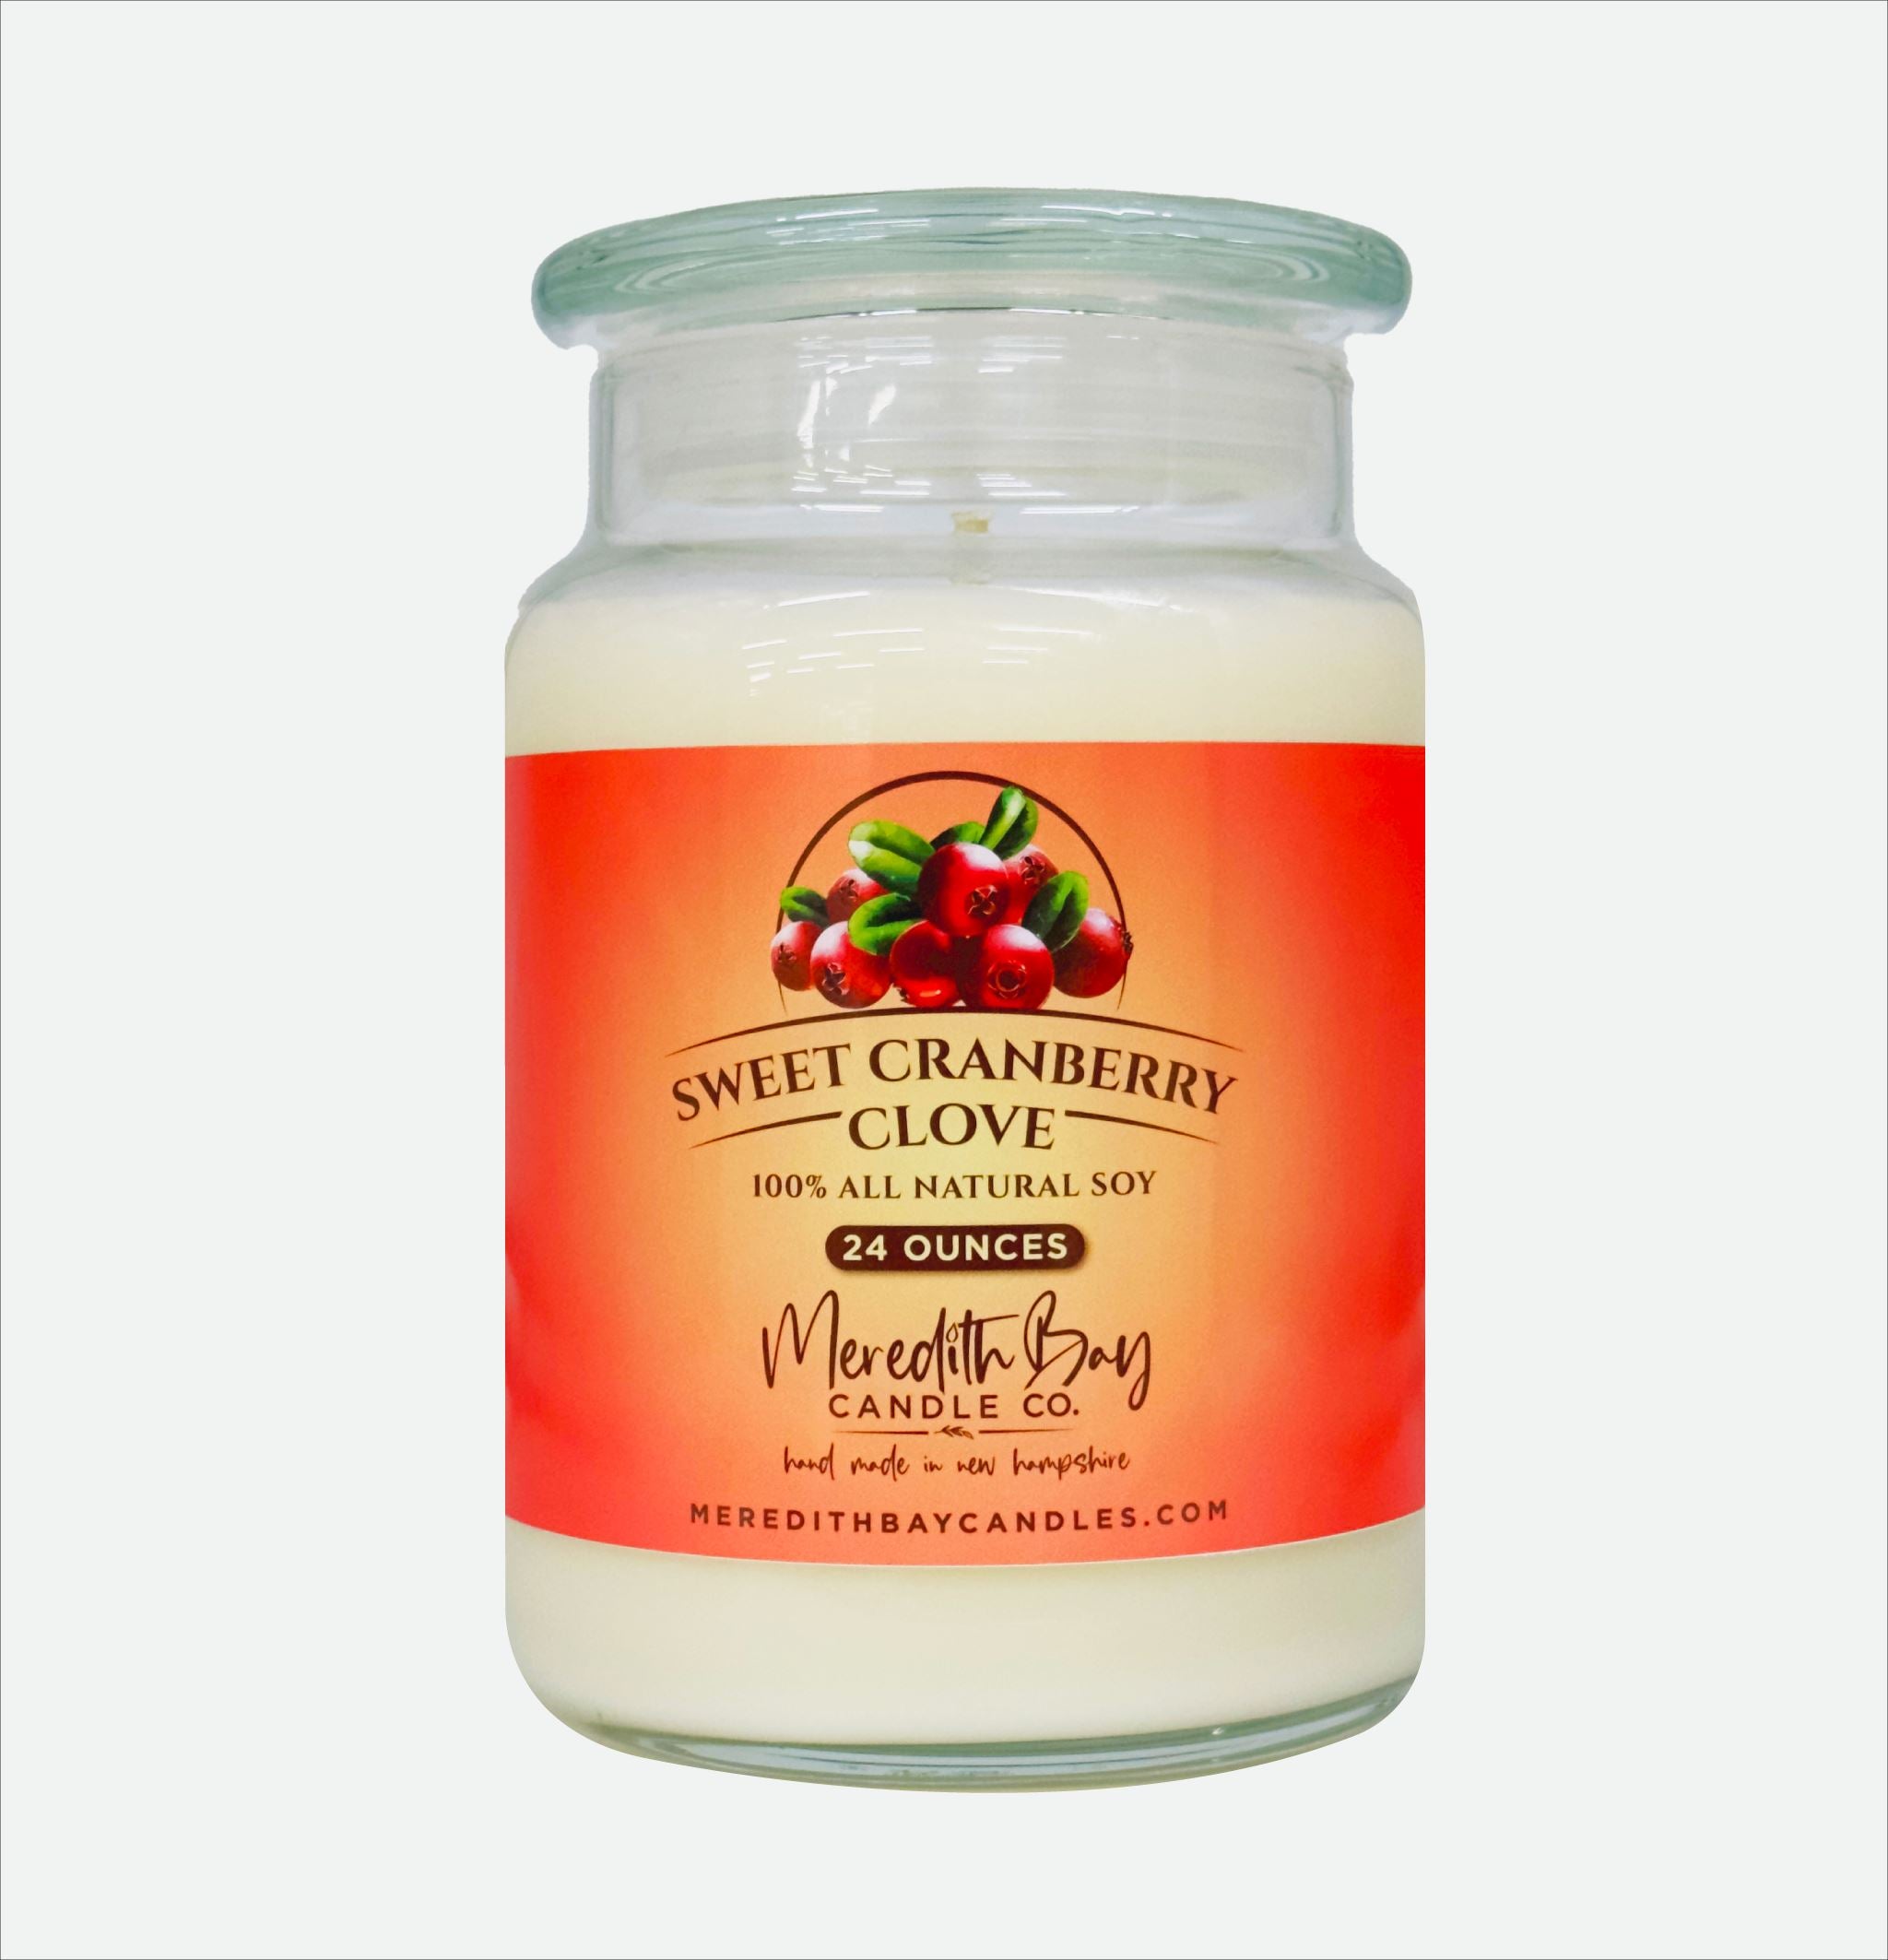 Sweet Cranberry Clove Soy Candle Meredith Bay Candle Co 24 Oz 